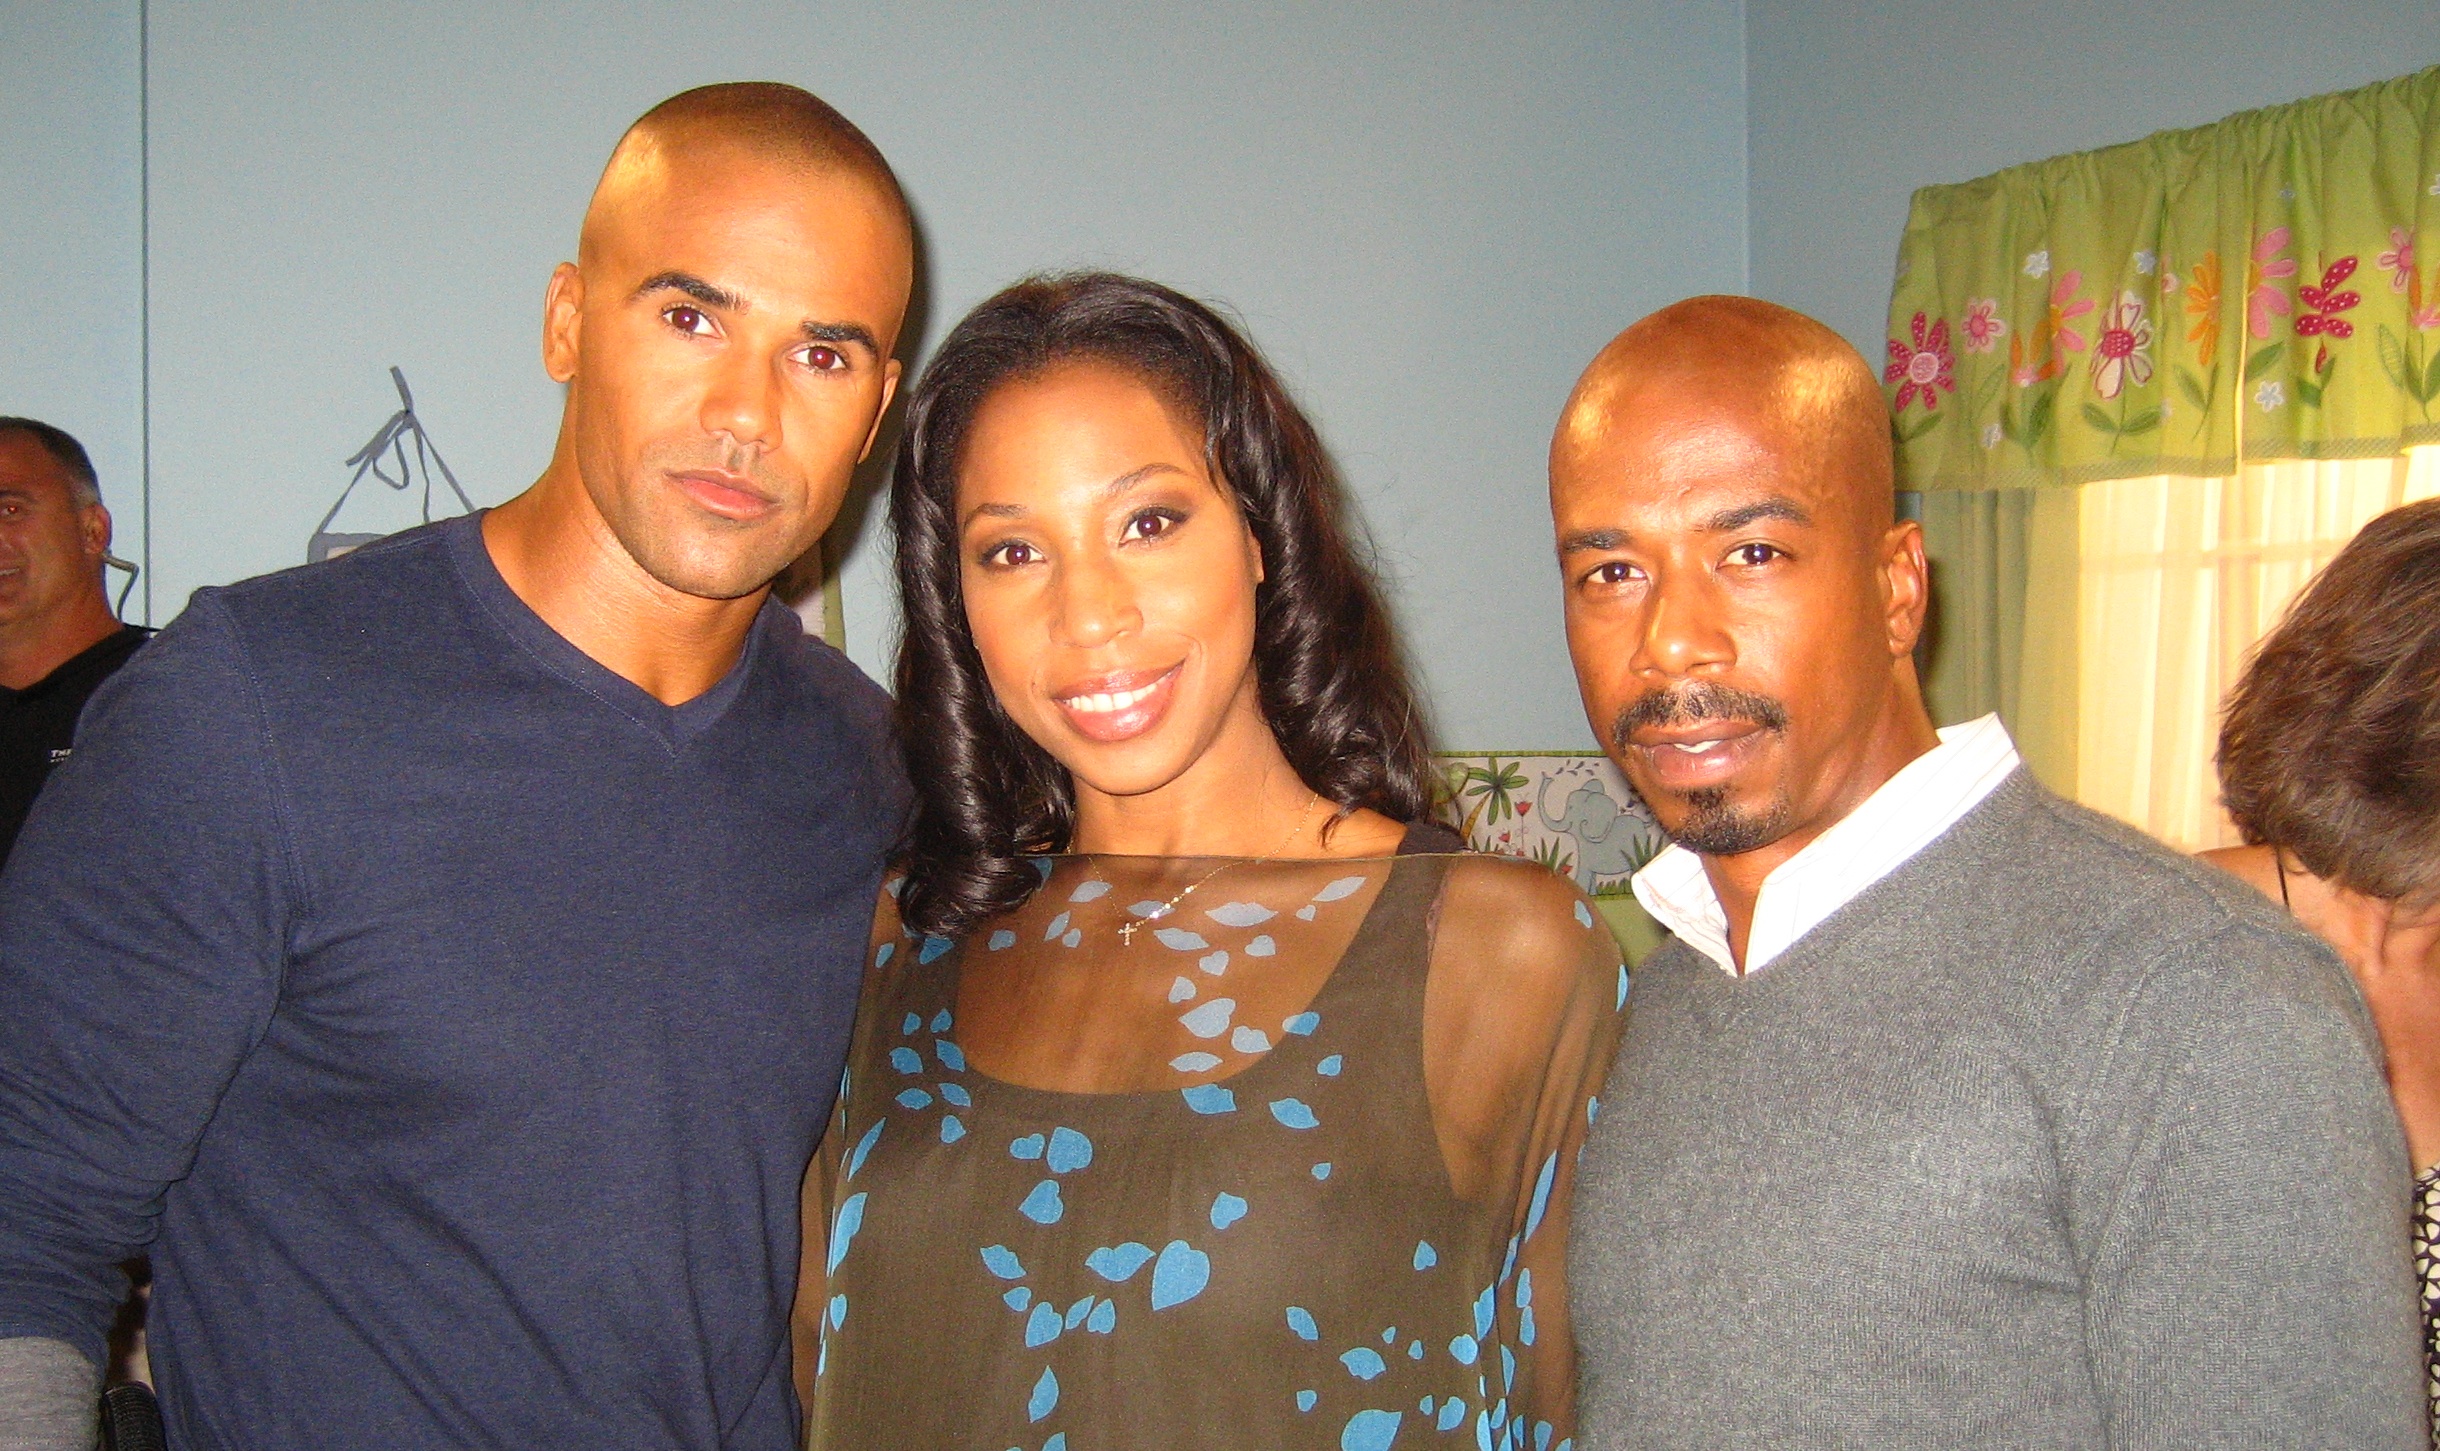 On set of Criminal Minds with Shemar Moore and Jo D. Jonz